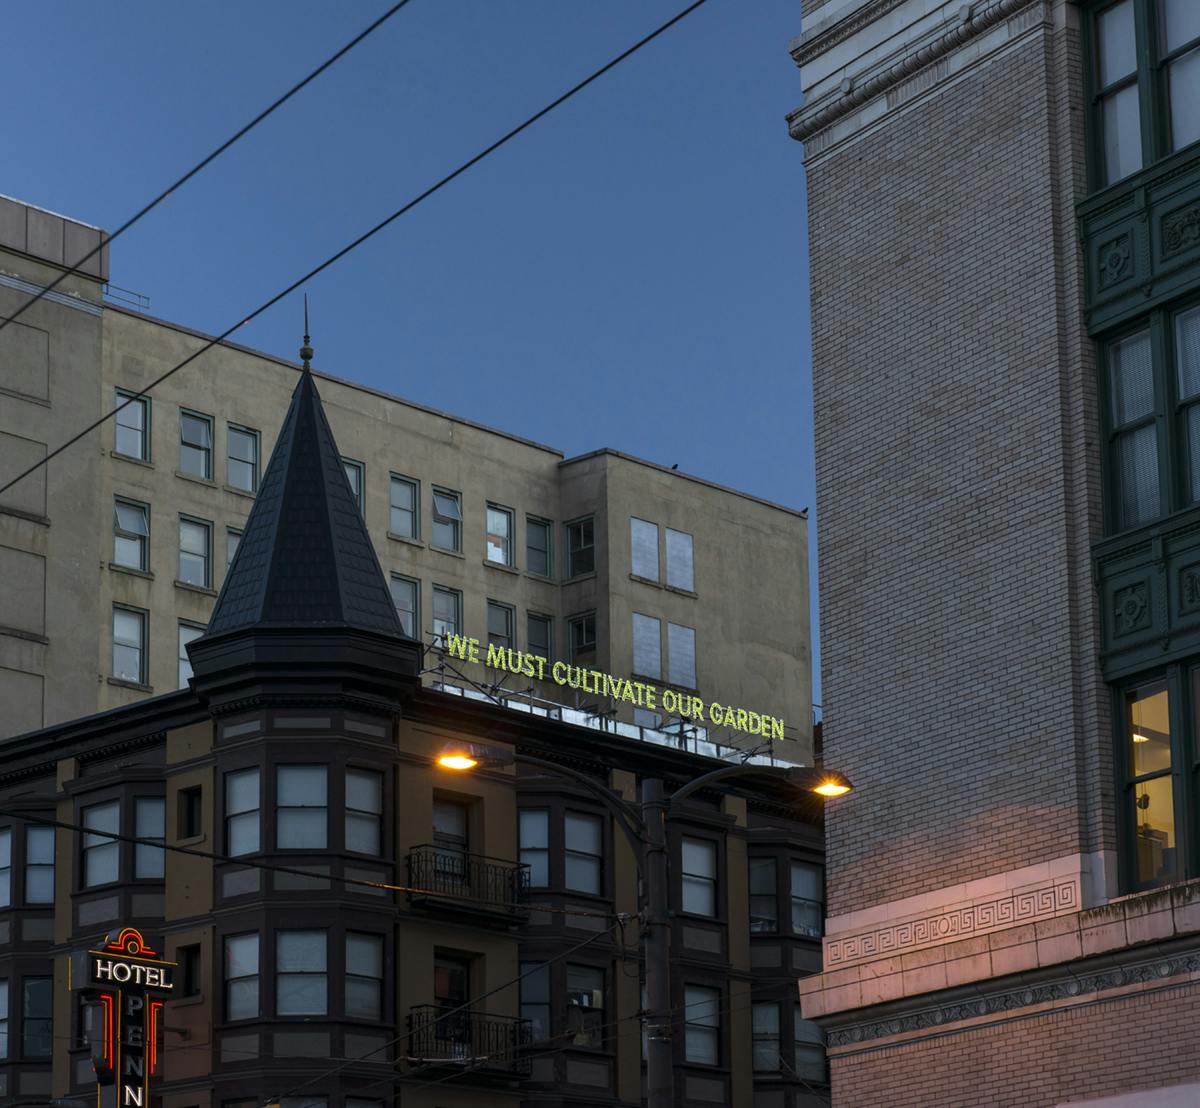 Nathan Coley’s work installed on the top loof of the Pennsylvania Hotel on East Hastings St. The Illuminated text reads “WE MUST CULTIVATE OUR GARDEN” in yellow-green light in the late evening sky.